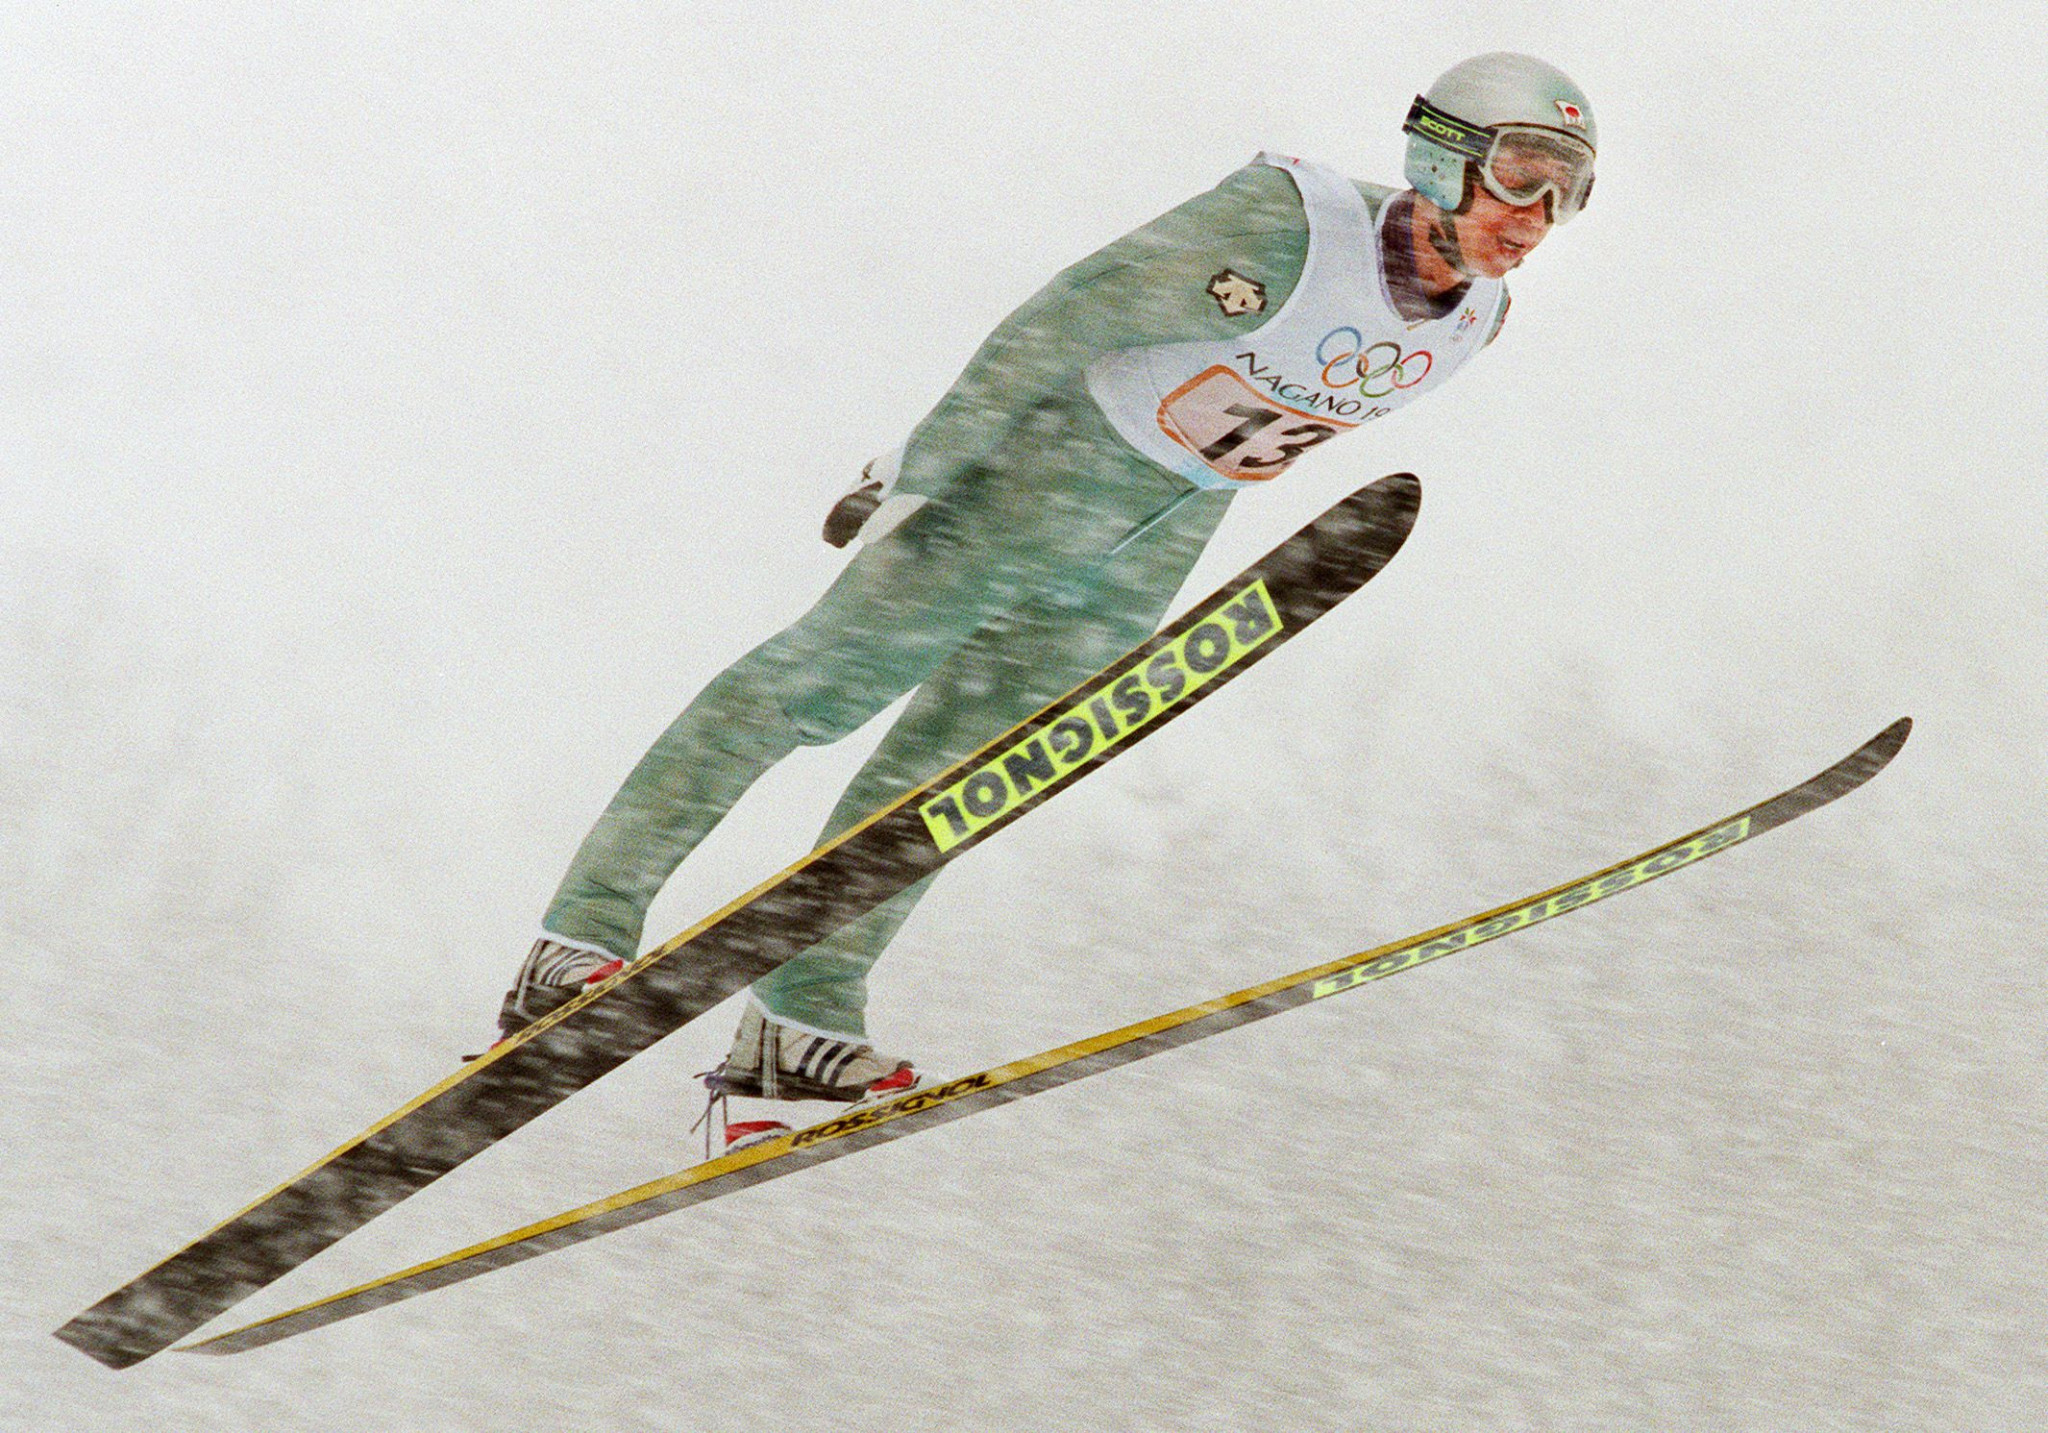 Masahiko Harada en route to his huge and decisive second effort - after a terrible first - which helped Japan secure gold in the men's team ski jump event at the home 1998 Winter Olympics in Nagano ©Getty Images